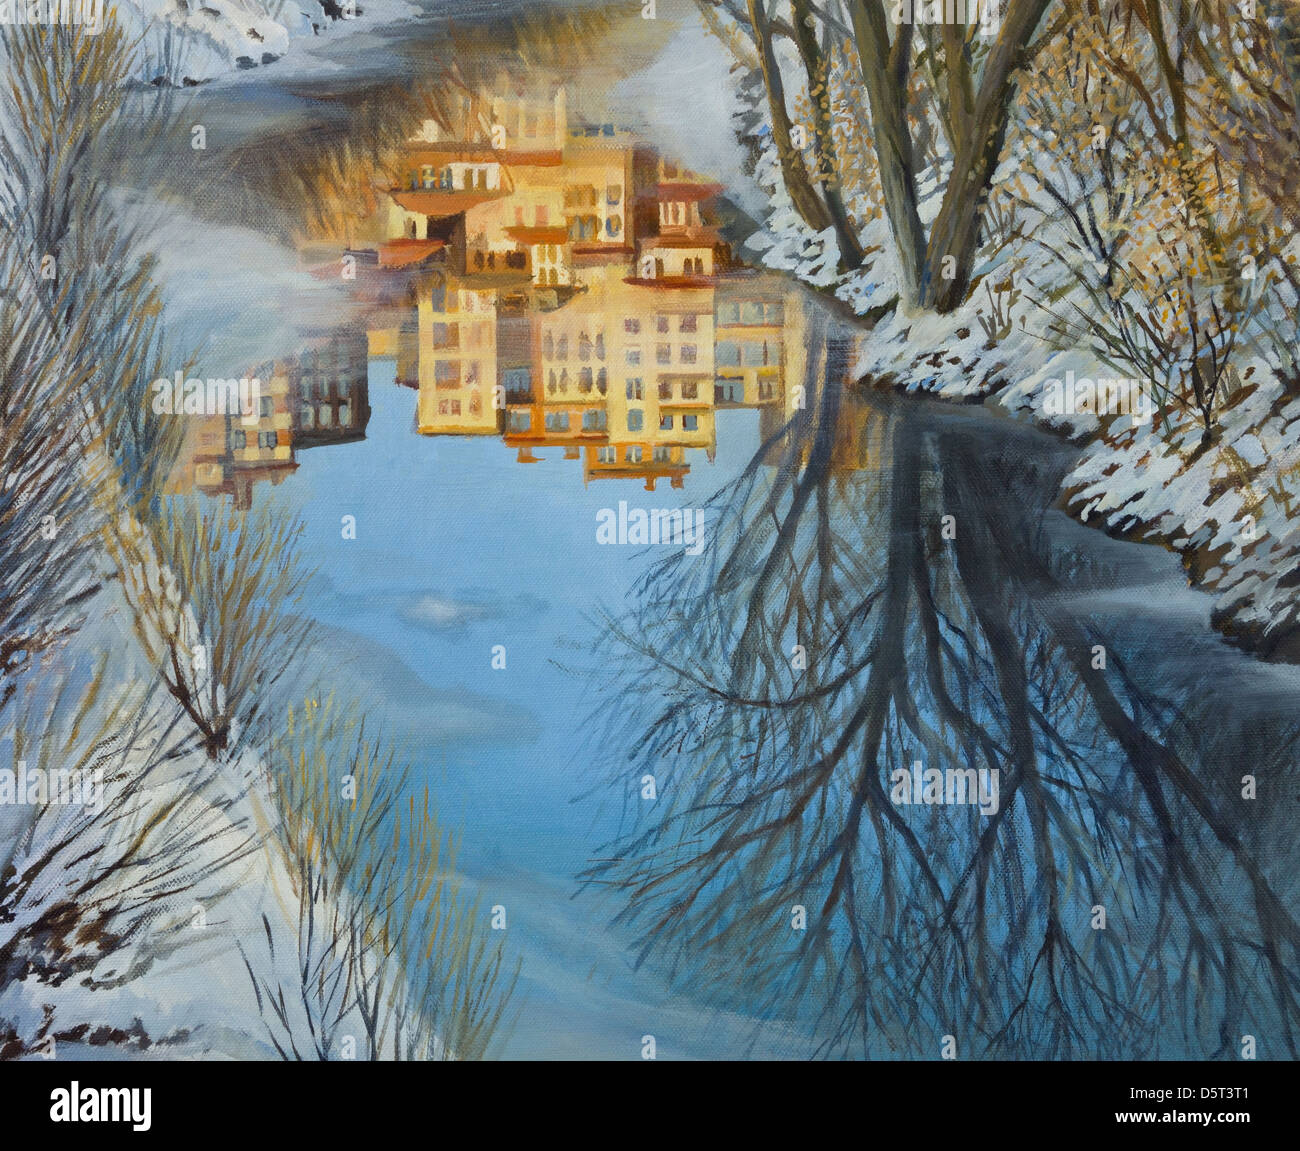 An oil painting on canvas of a winter scene with colorful buildings reflection in a partly frozen mountain river. Stock Photo